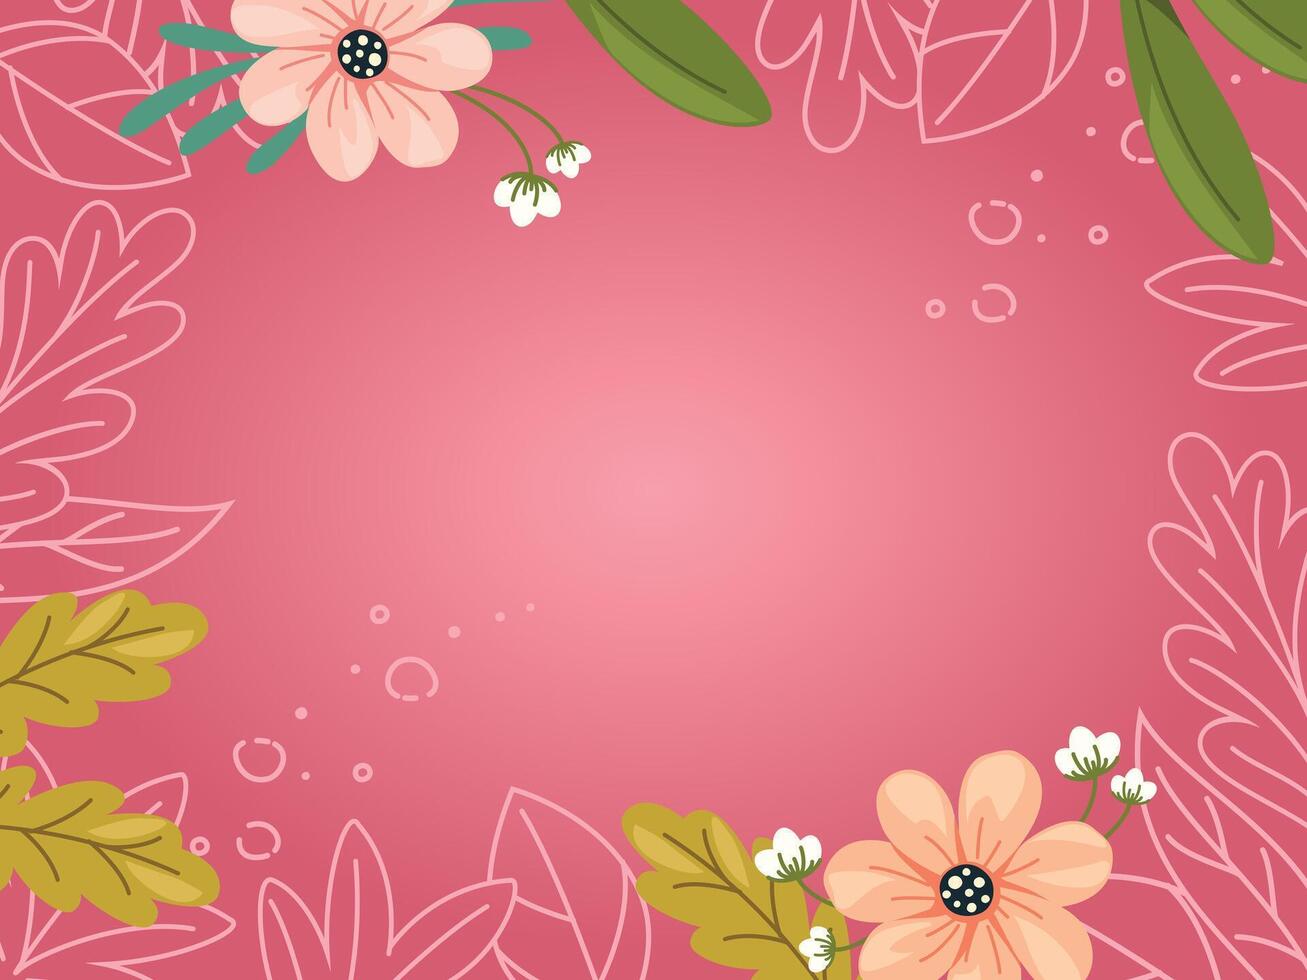 Abstract background nature frame vector